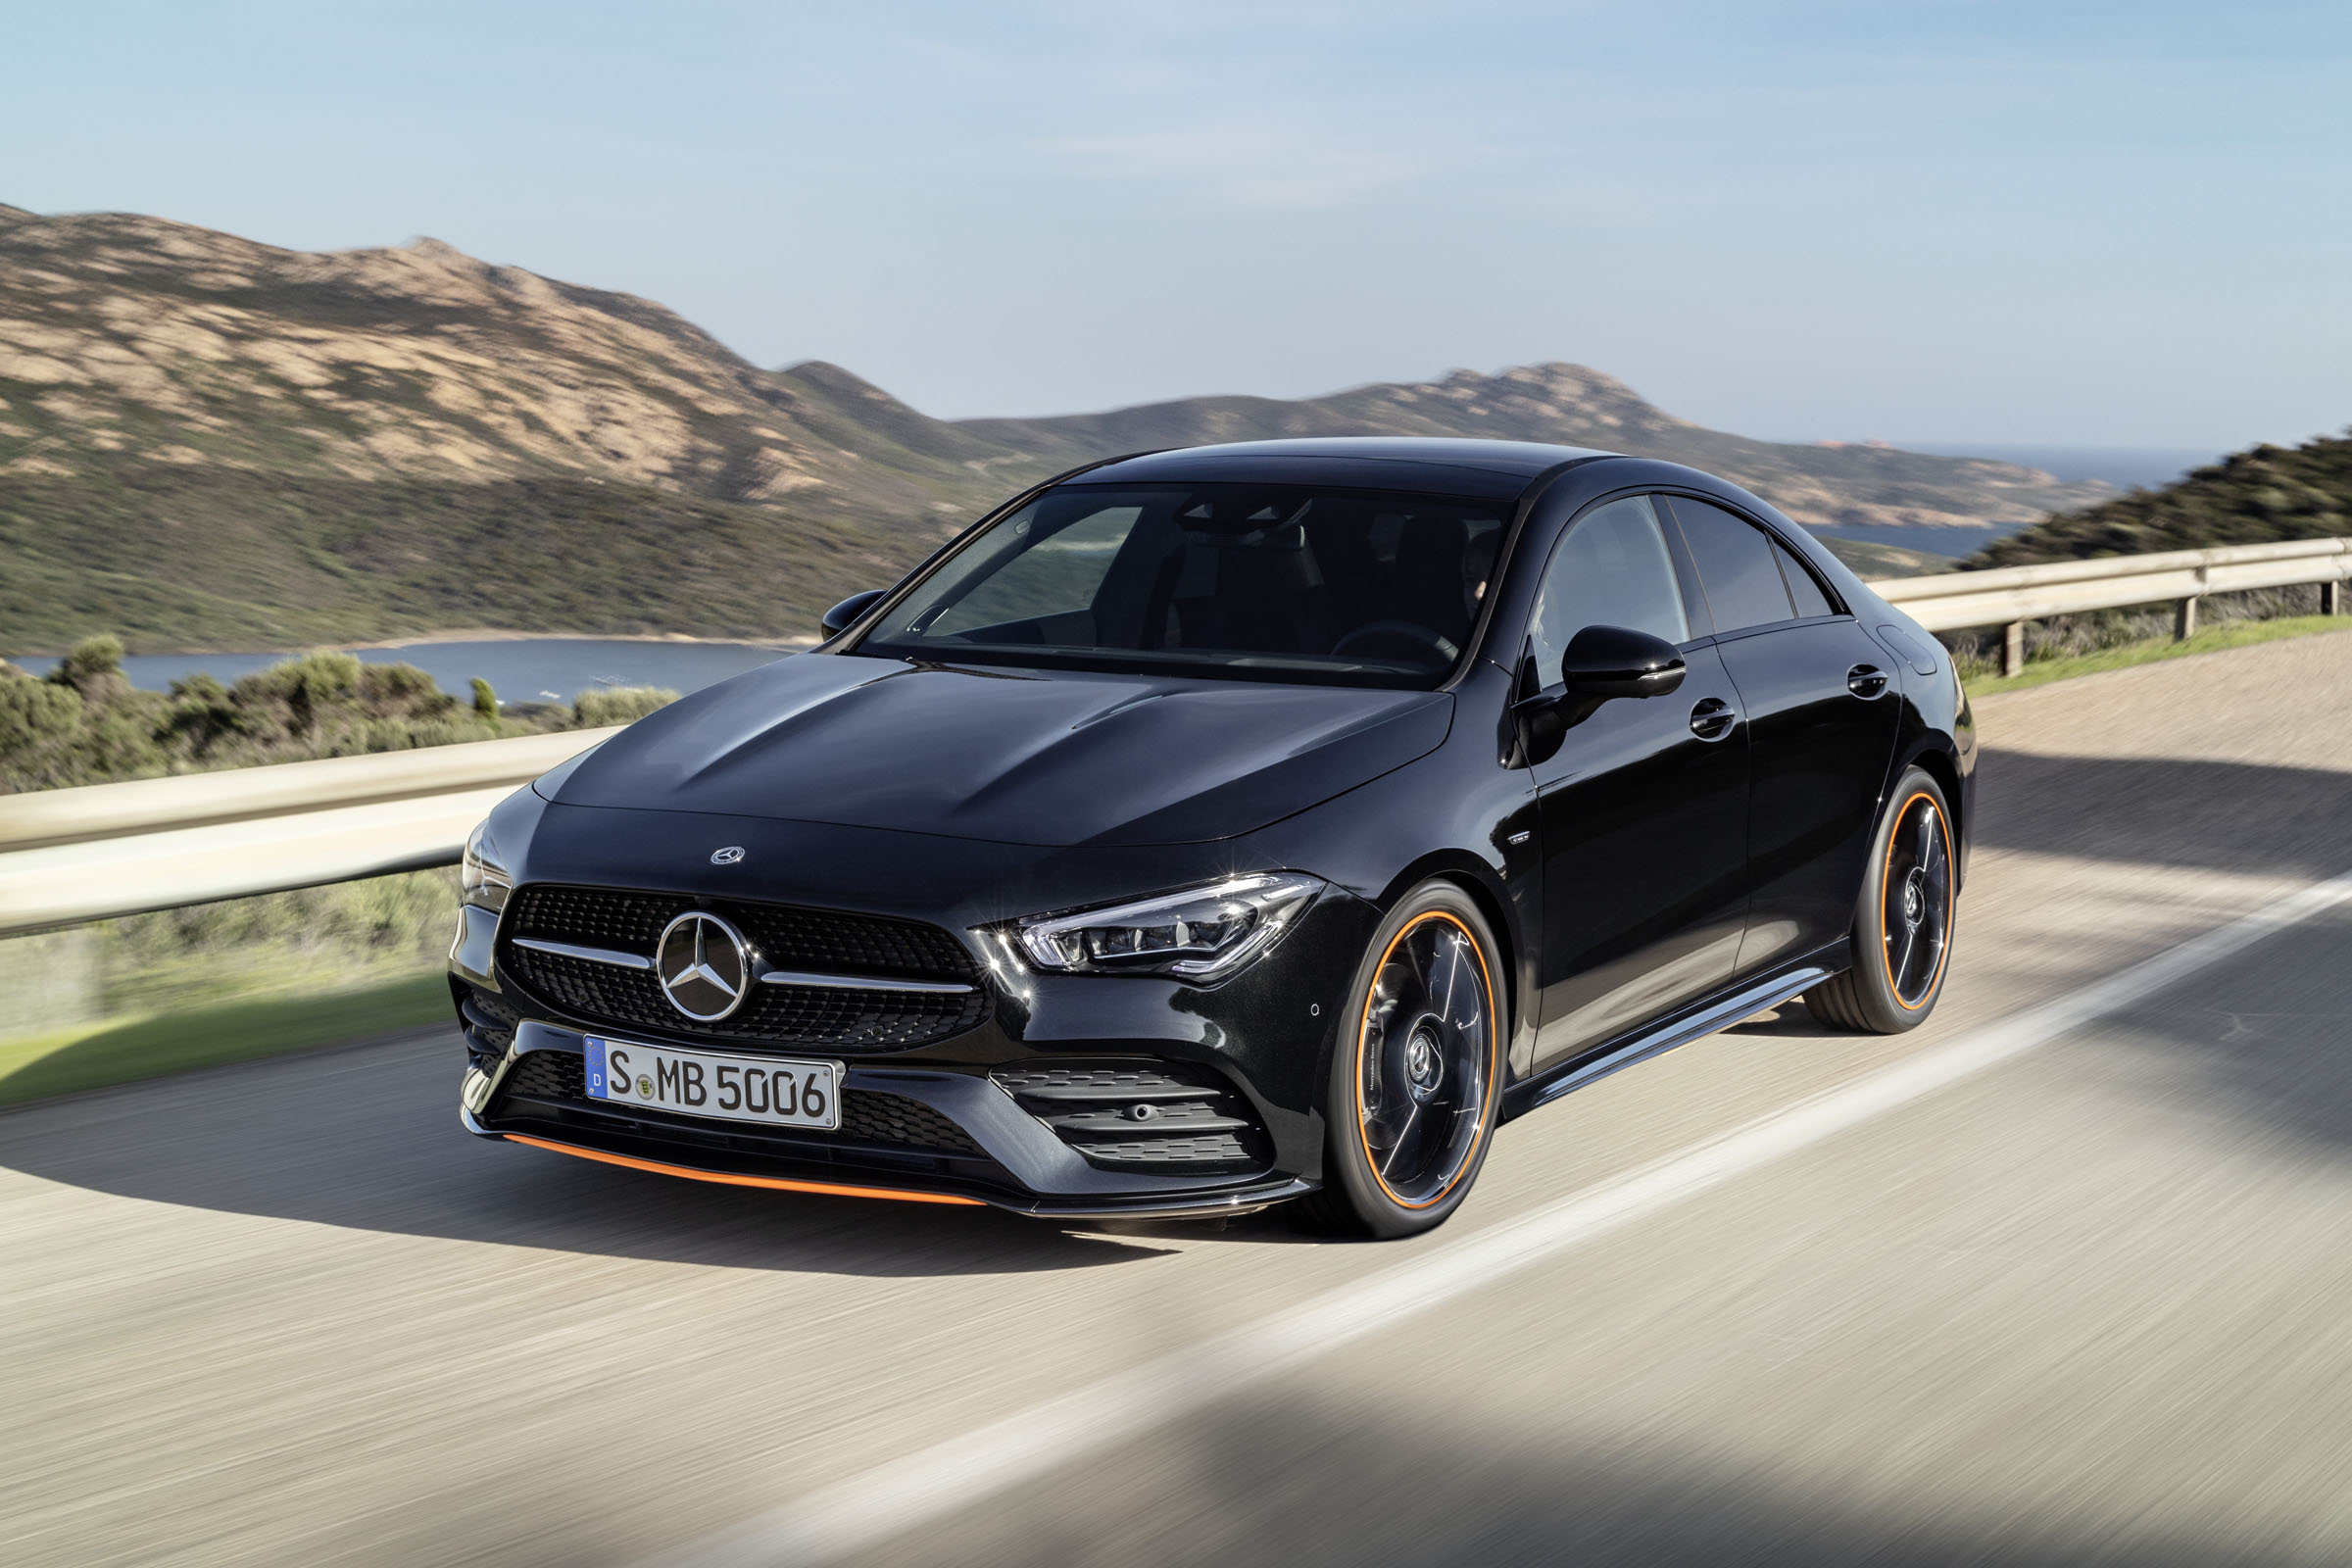 Mercedes CLA 2019 prices, specification and onsale date